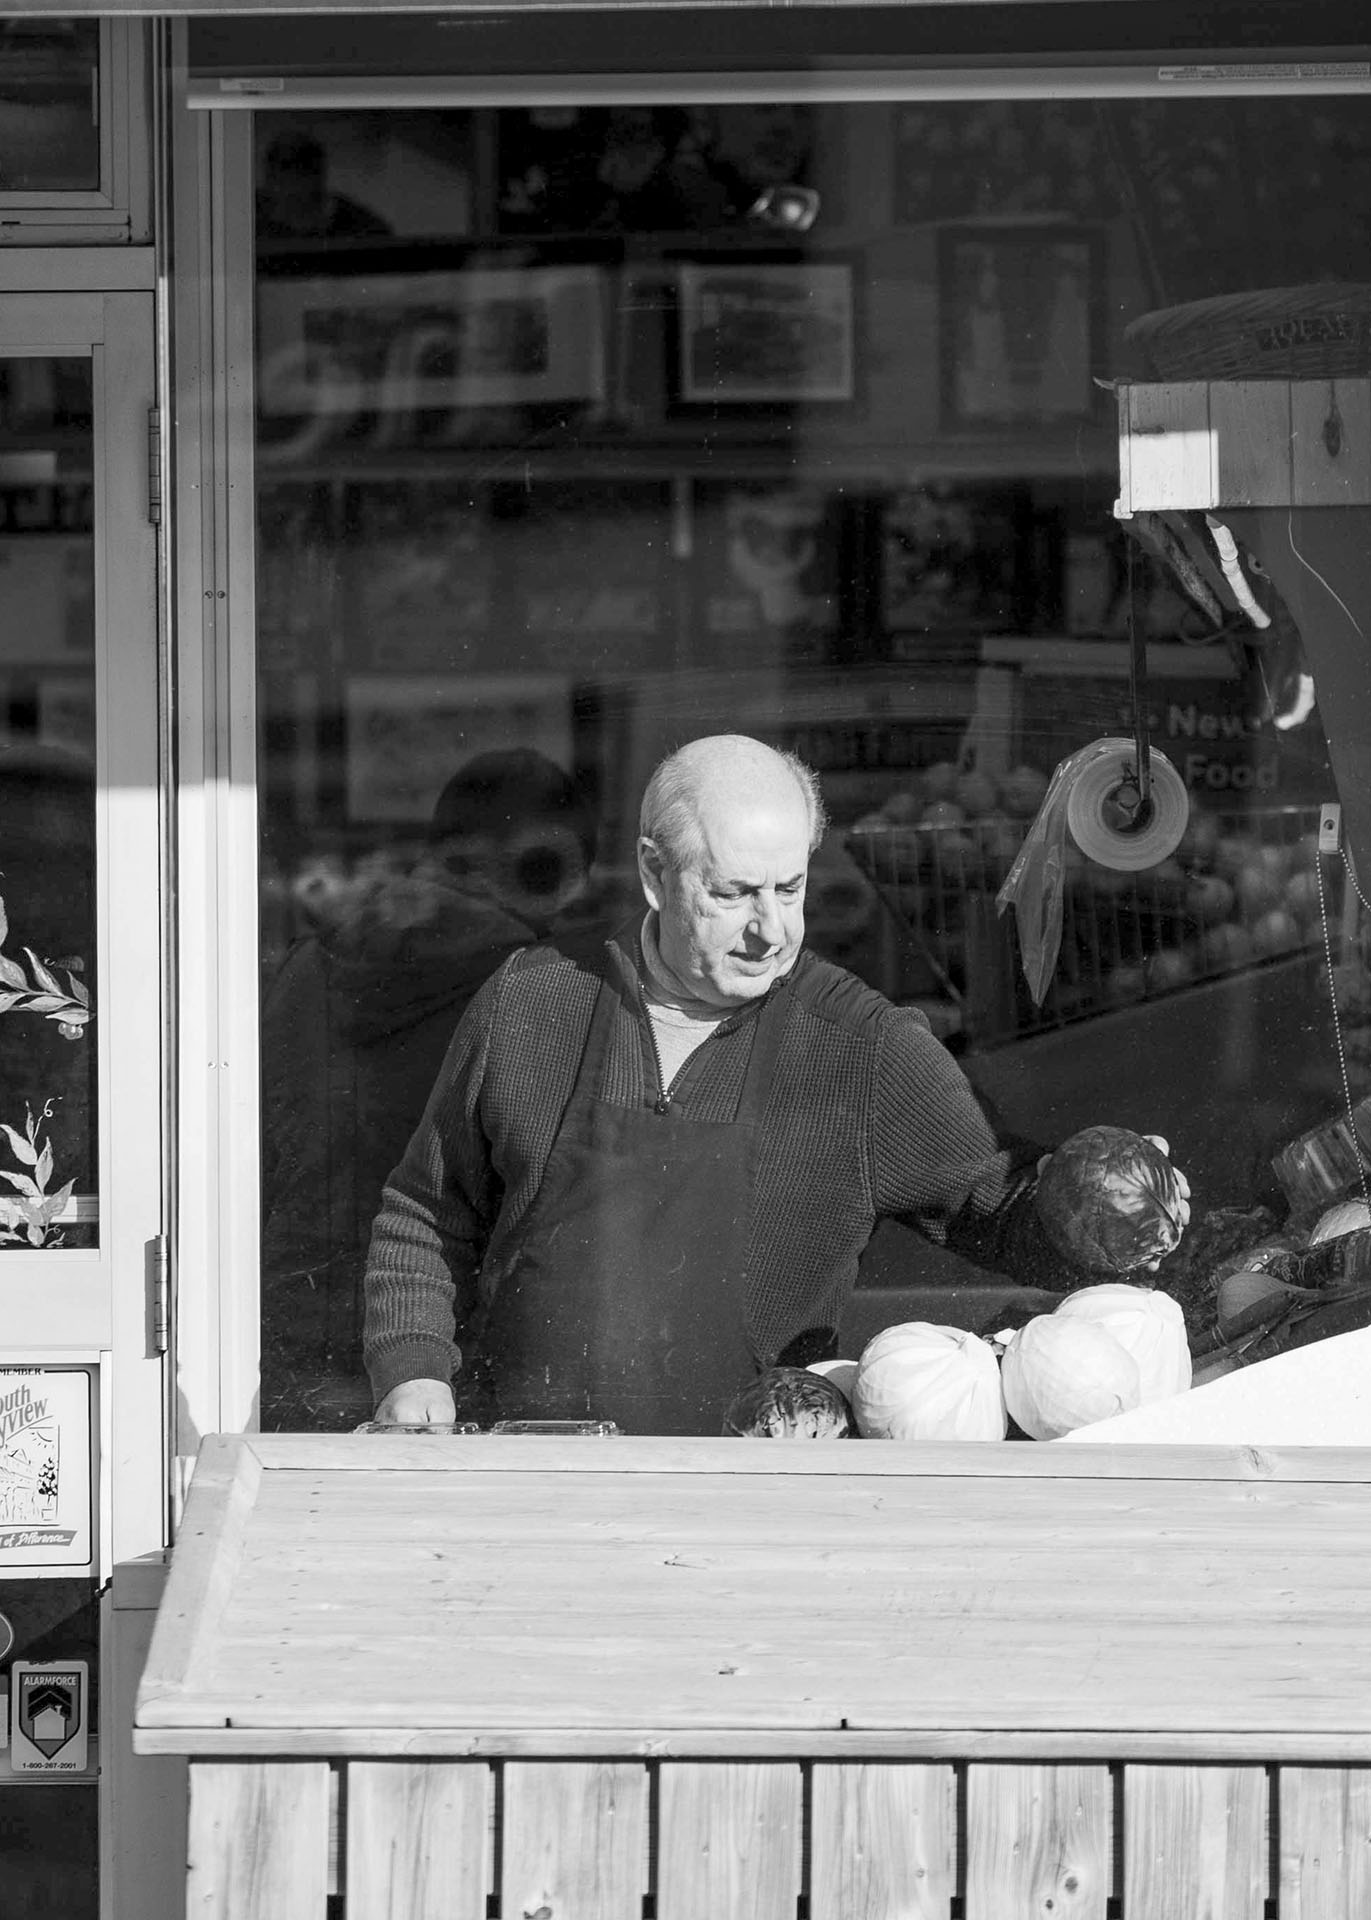 black and white image of an employee restocking vegetables show through a window